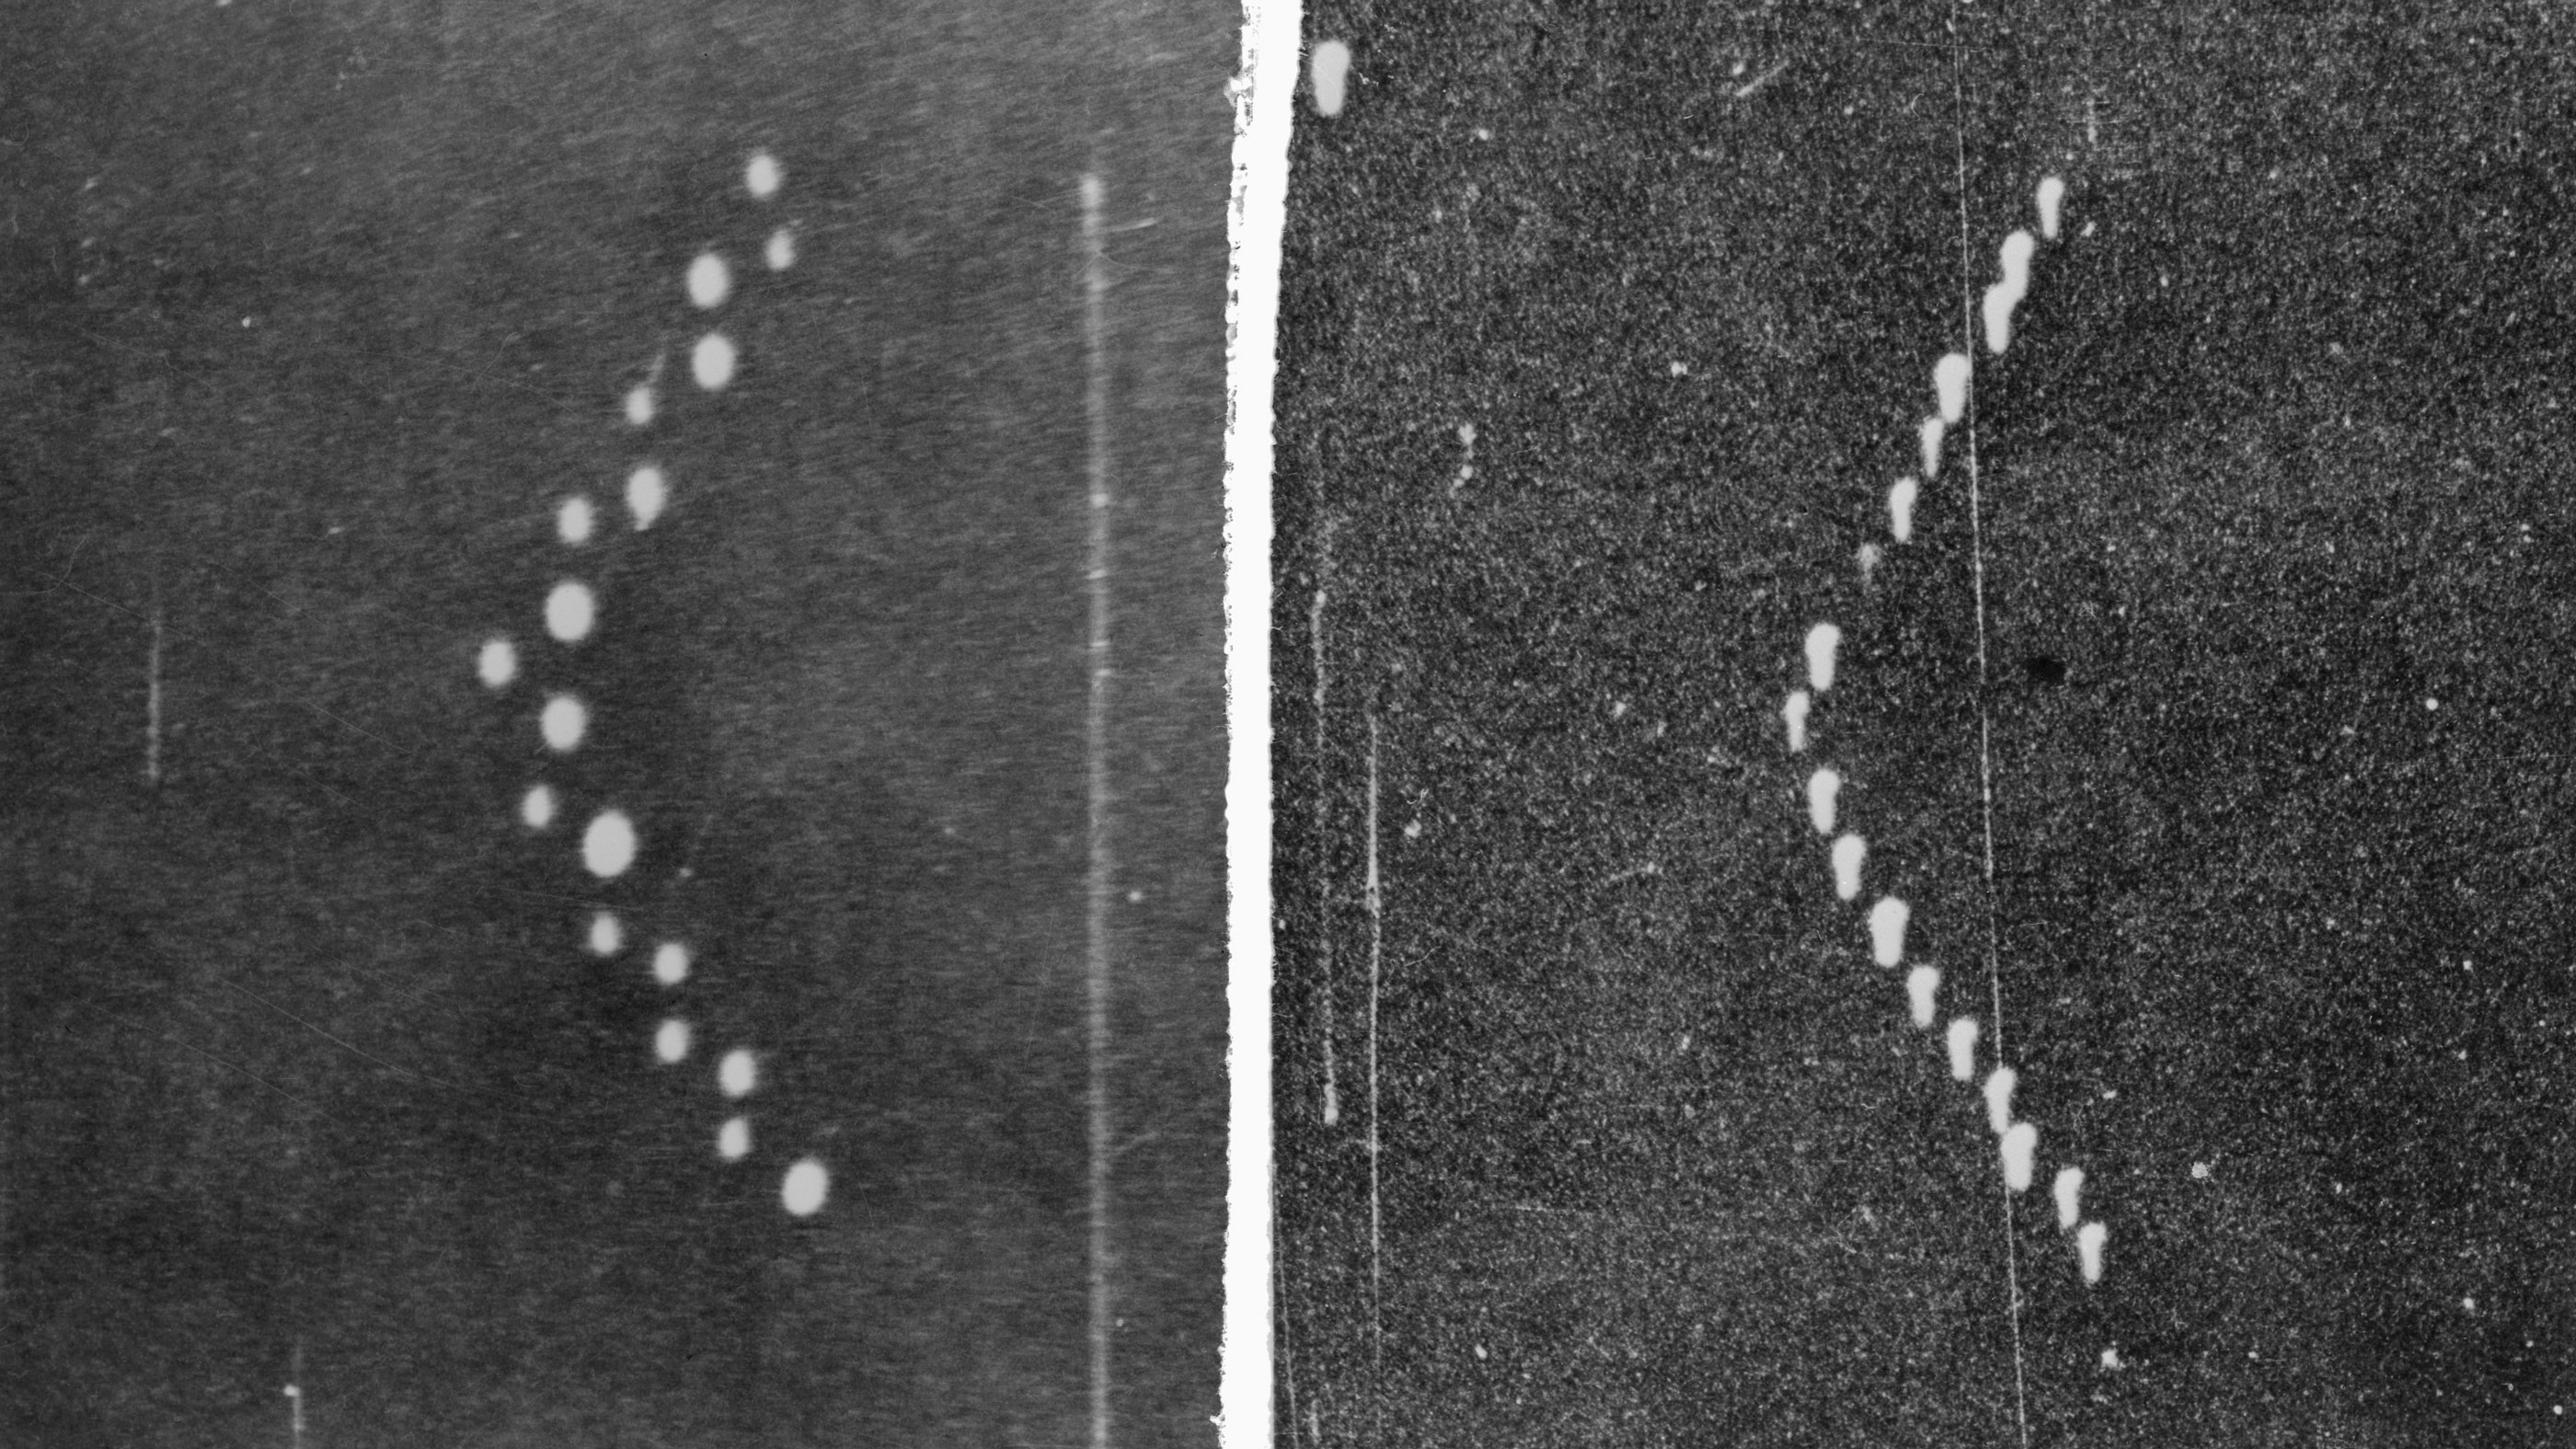 UFO Sightings: Lubbock Lights Remain a Mystery - HISTORY